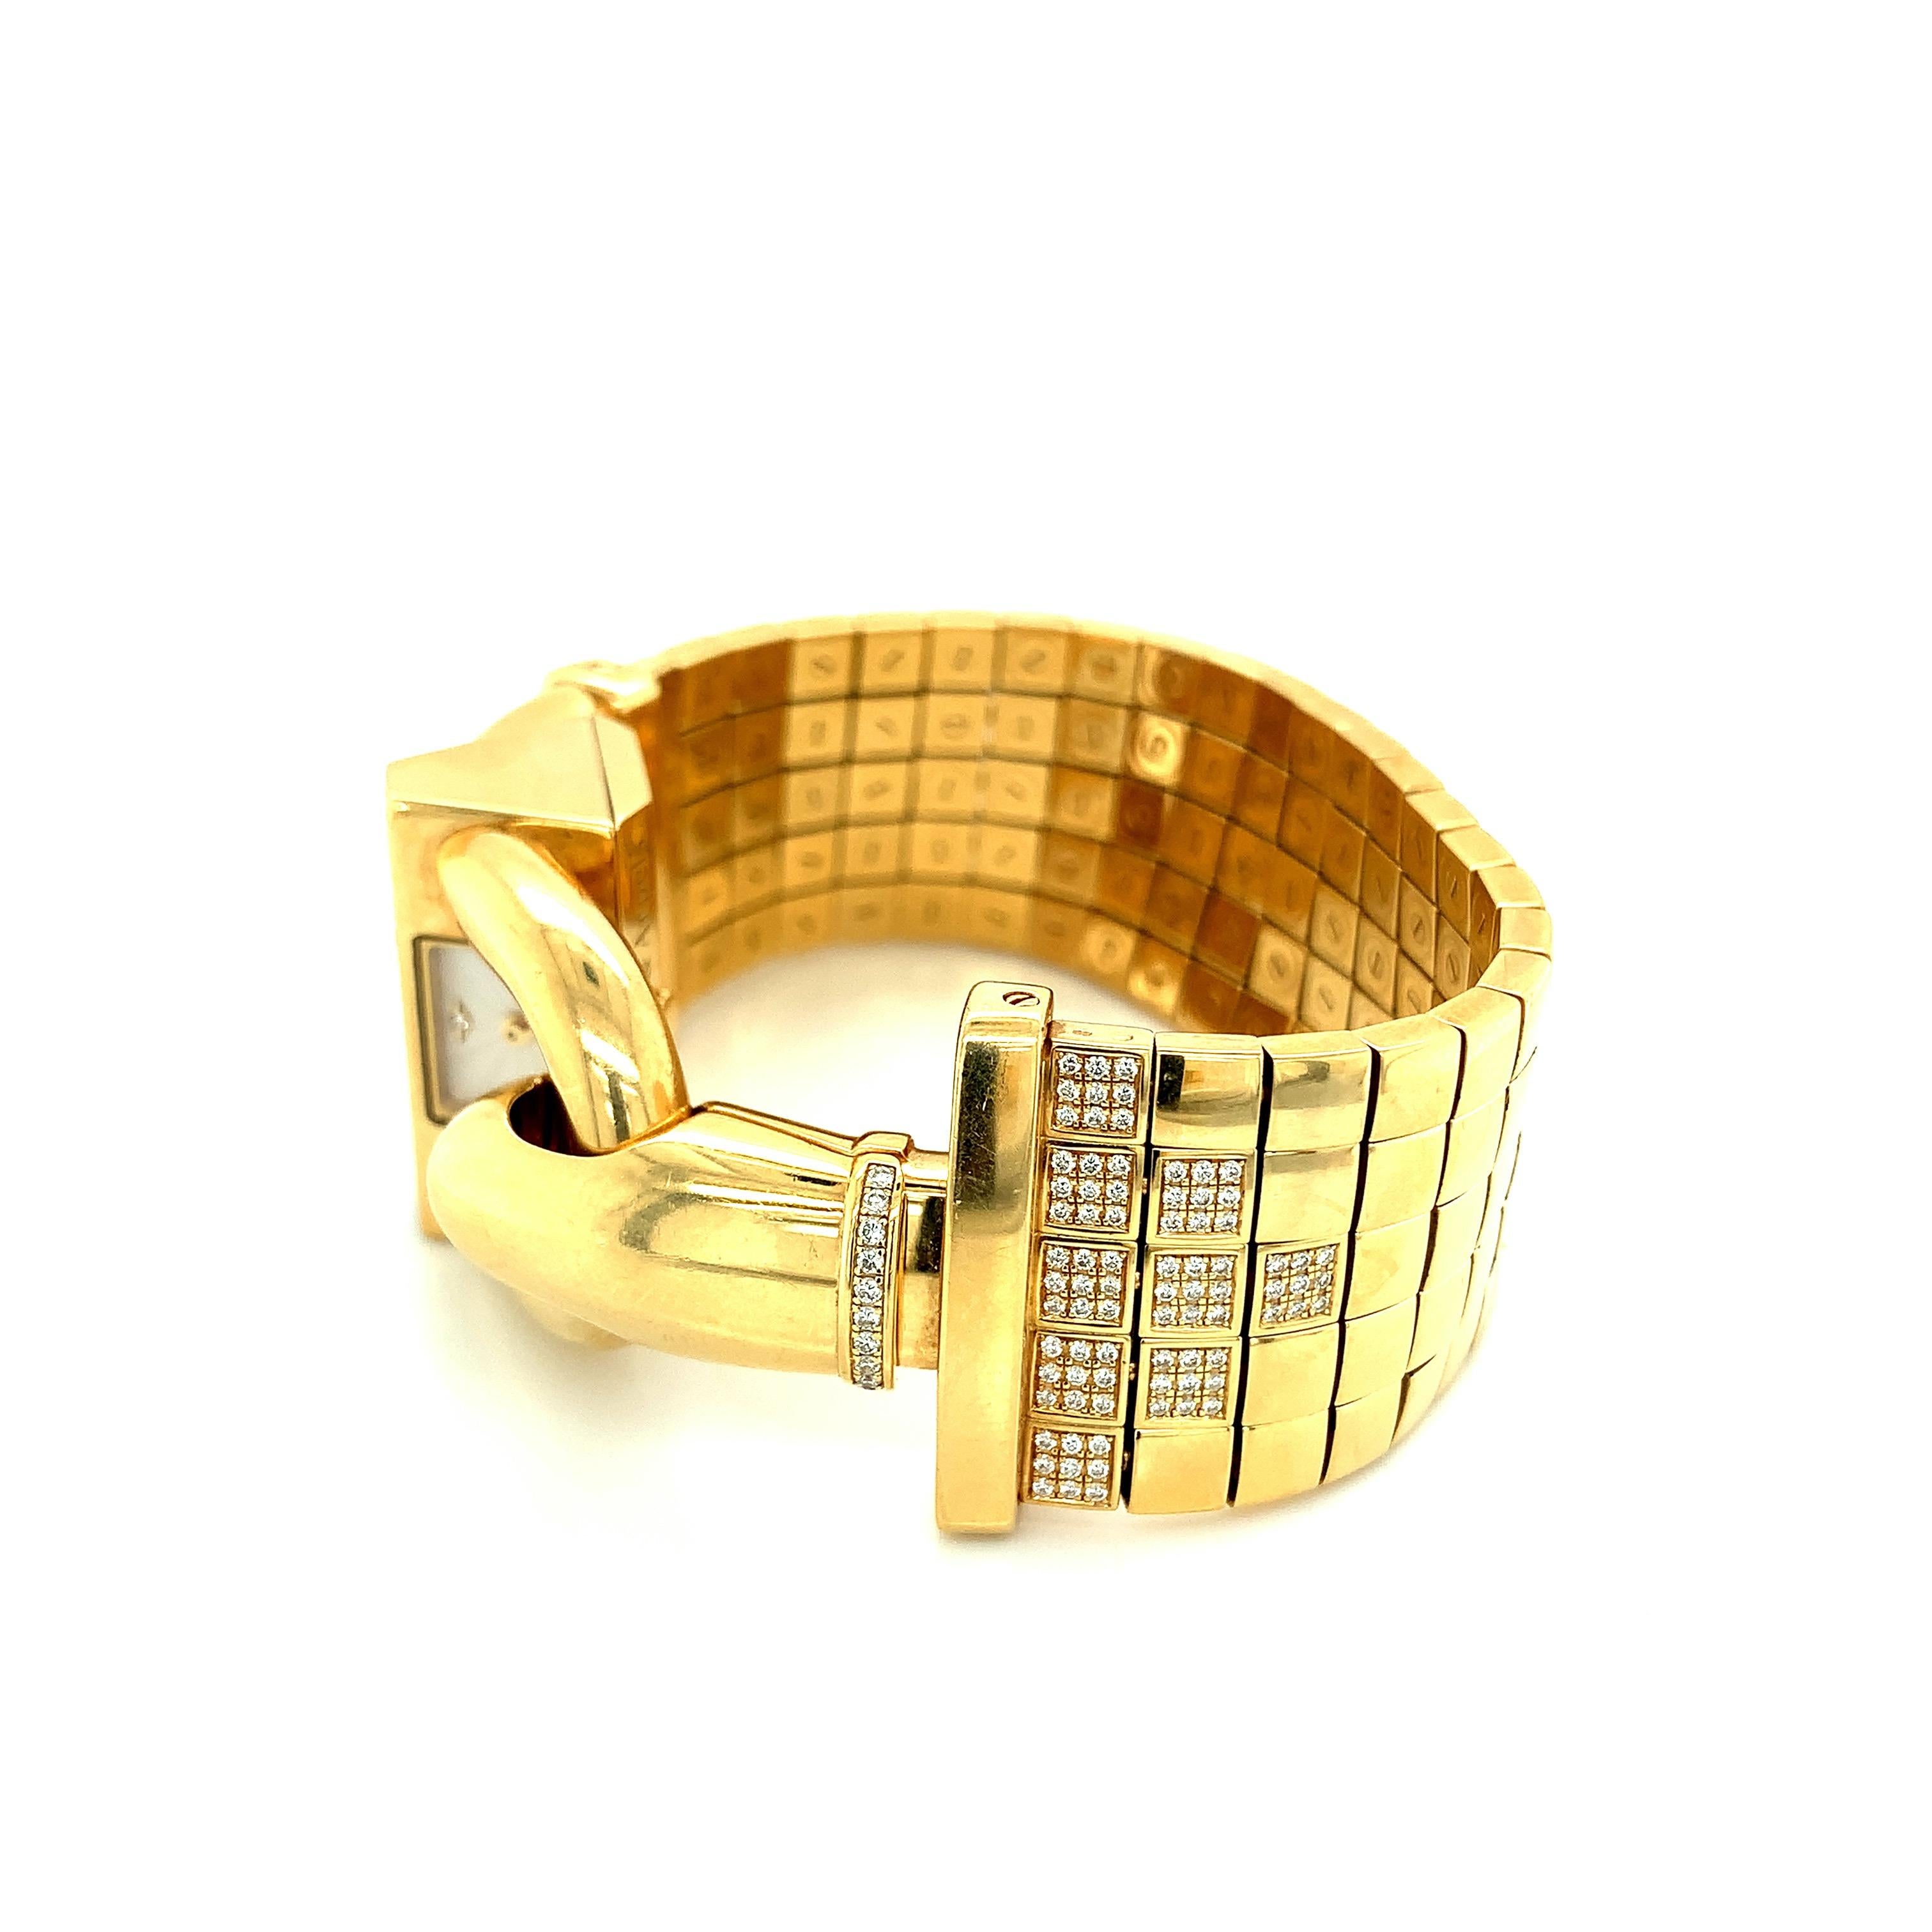 Van Cleef & Arpels 18 karat yellow gold wristwatch from the iconic Cadenas collection. This watch is very well made and features beautiful craftsmanship in the strap, which is made out of 120 gold squares, allowing it to be flexible. Made in